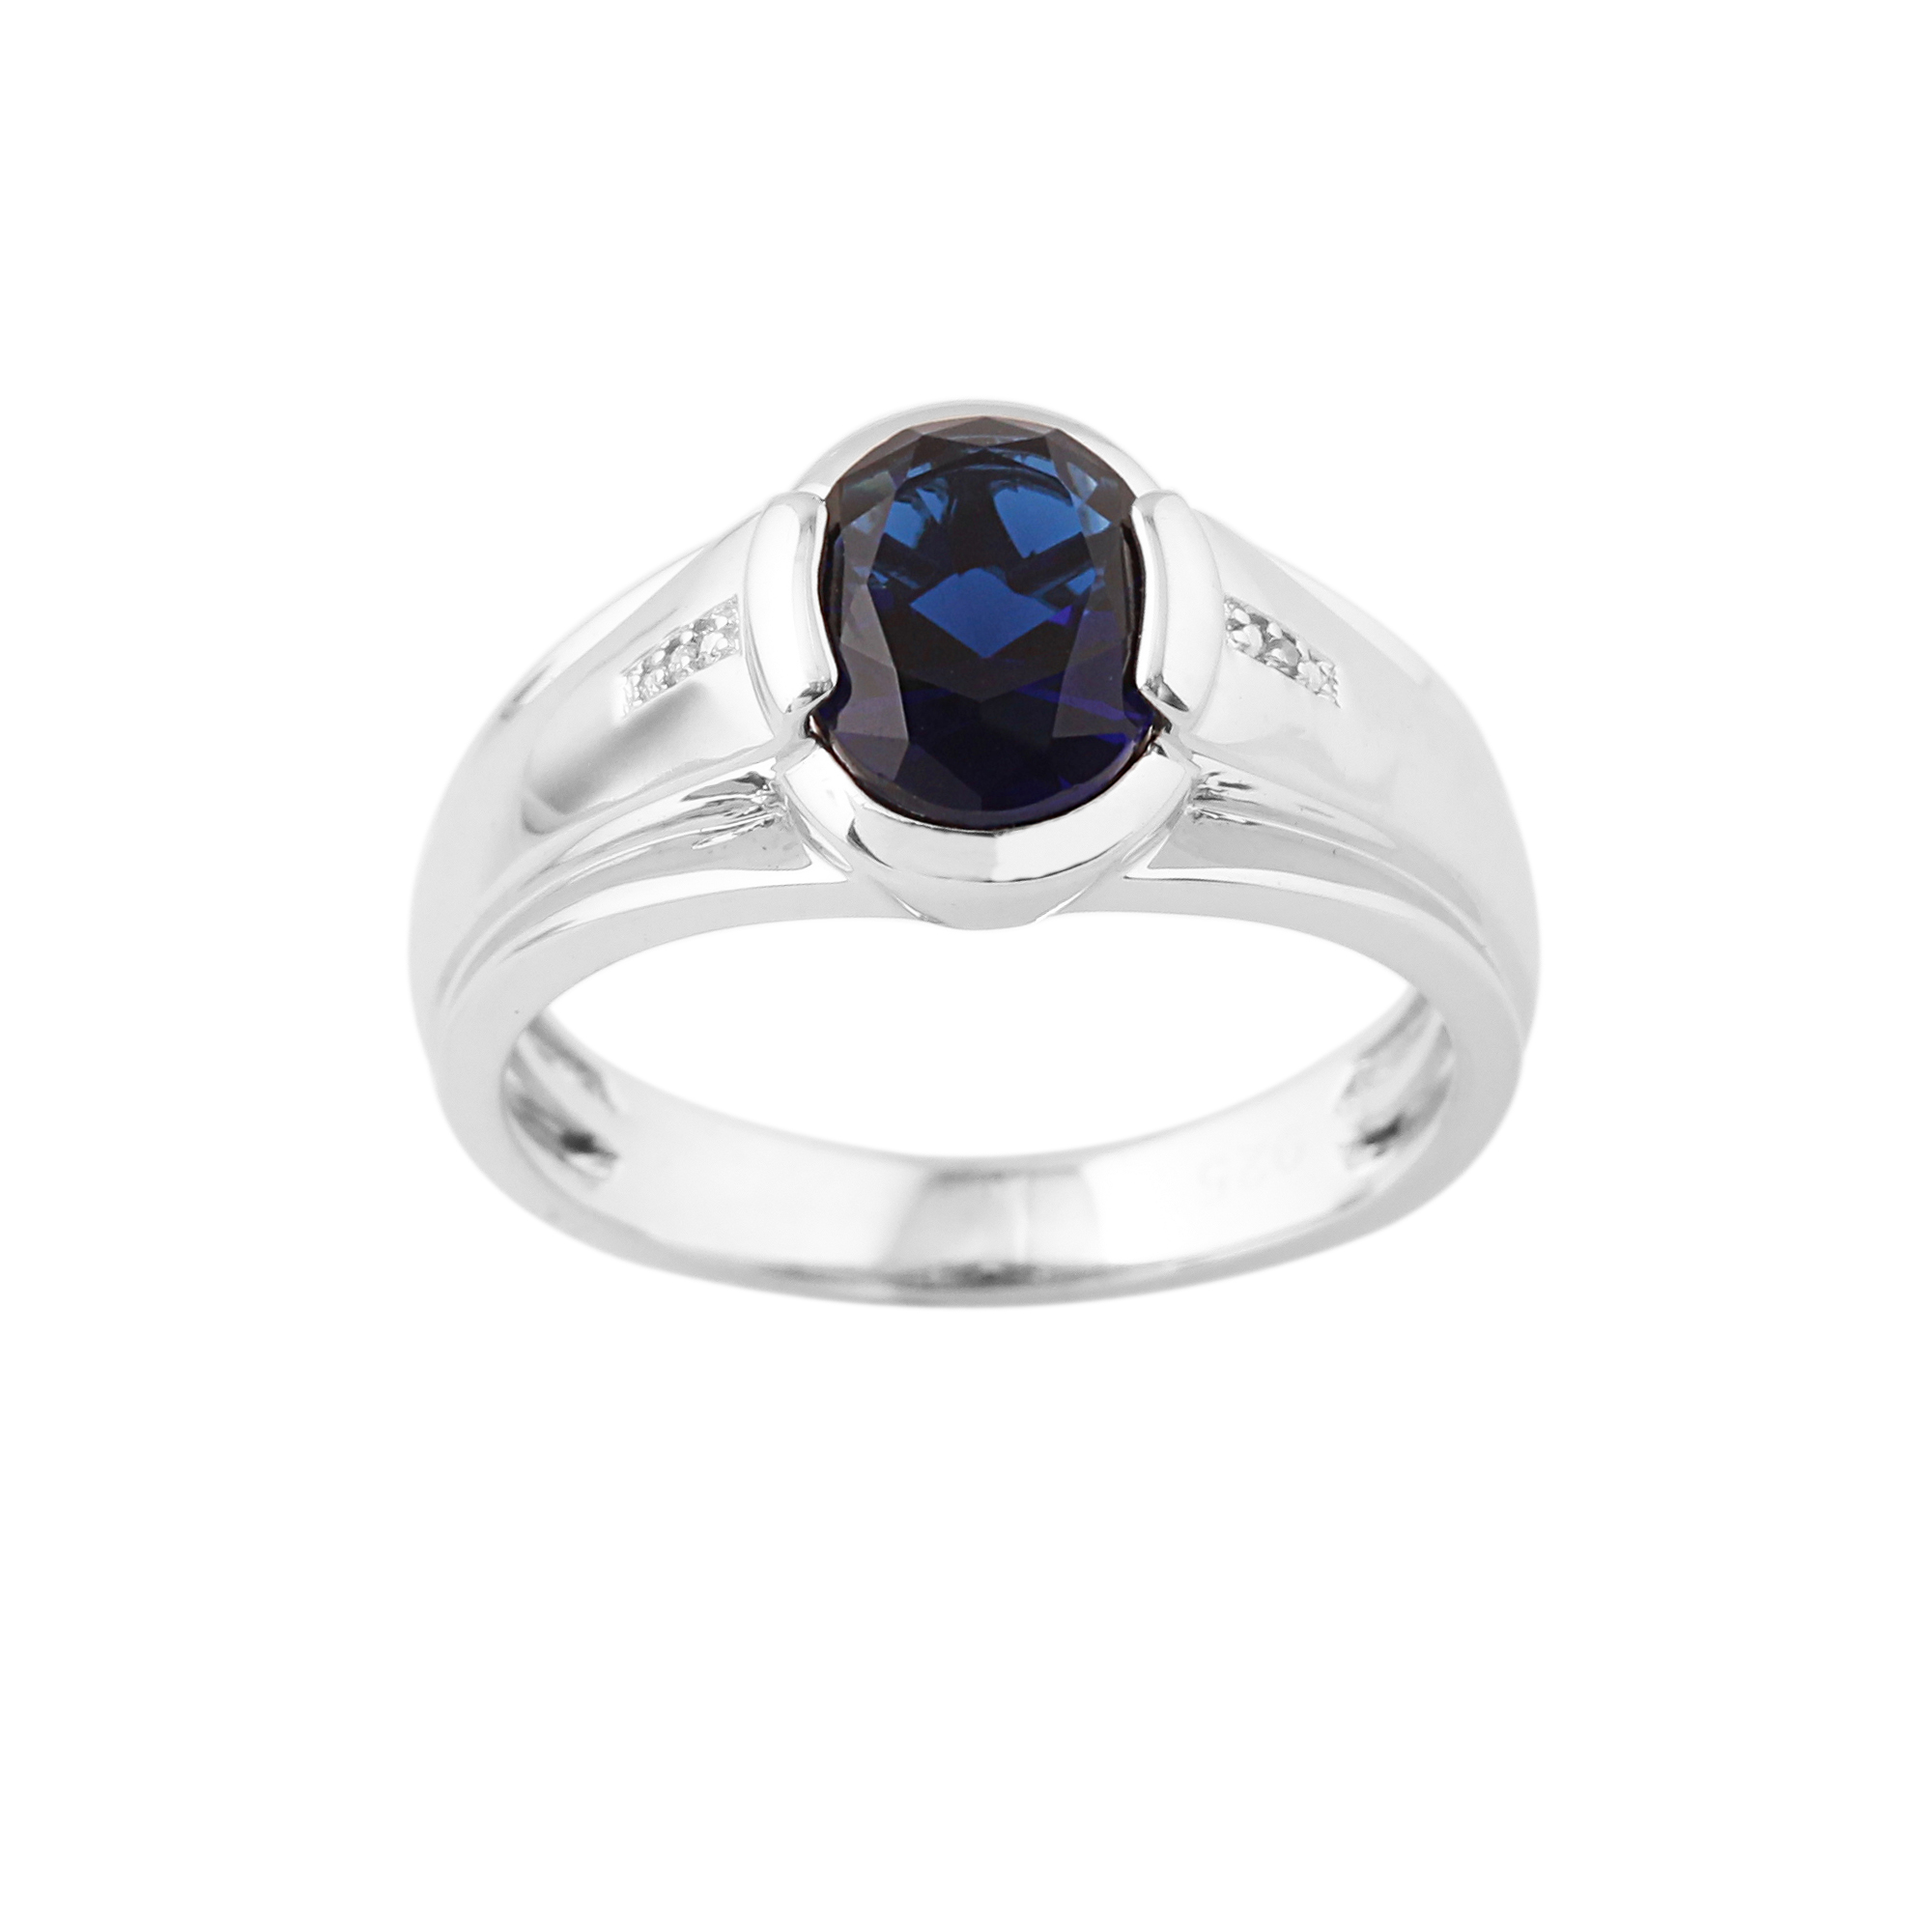 Men's Created Sapphire Sterling Silver and Diamond Accent Ring -  Size 10 Only